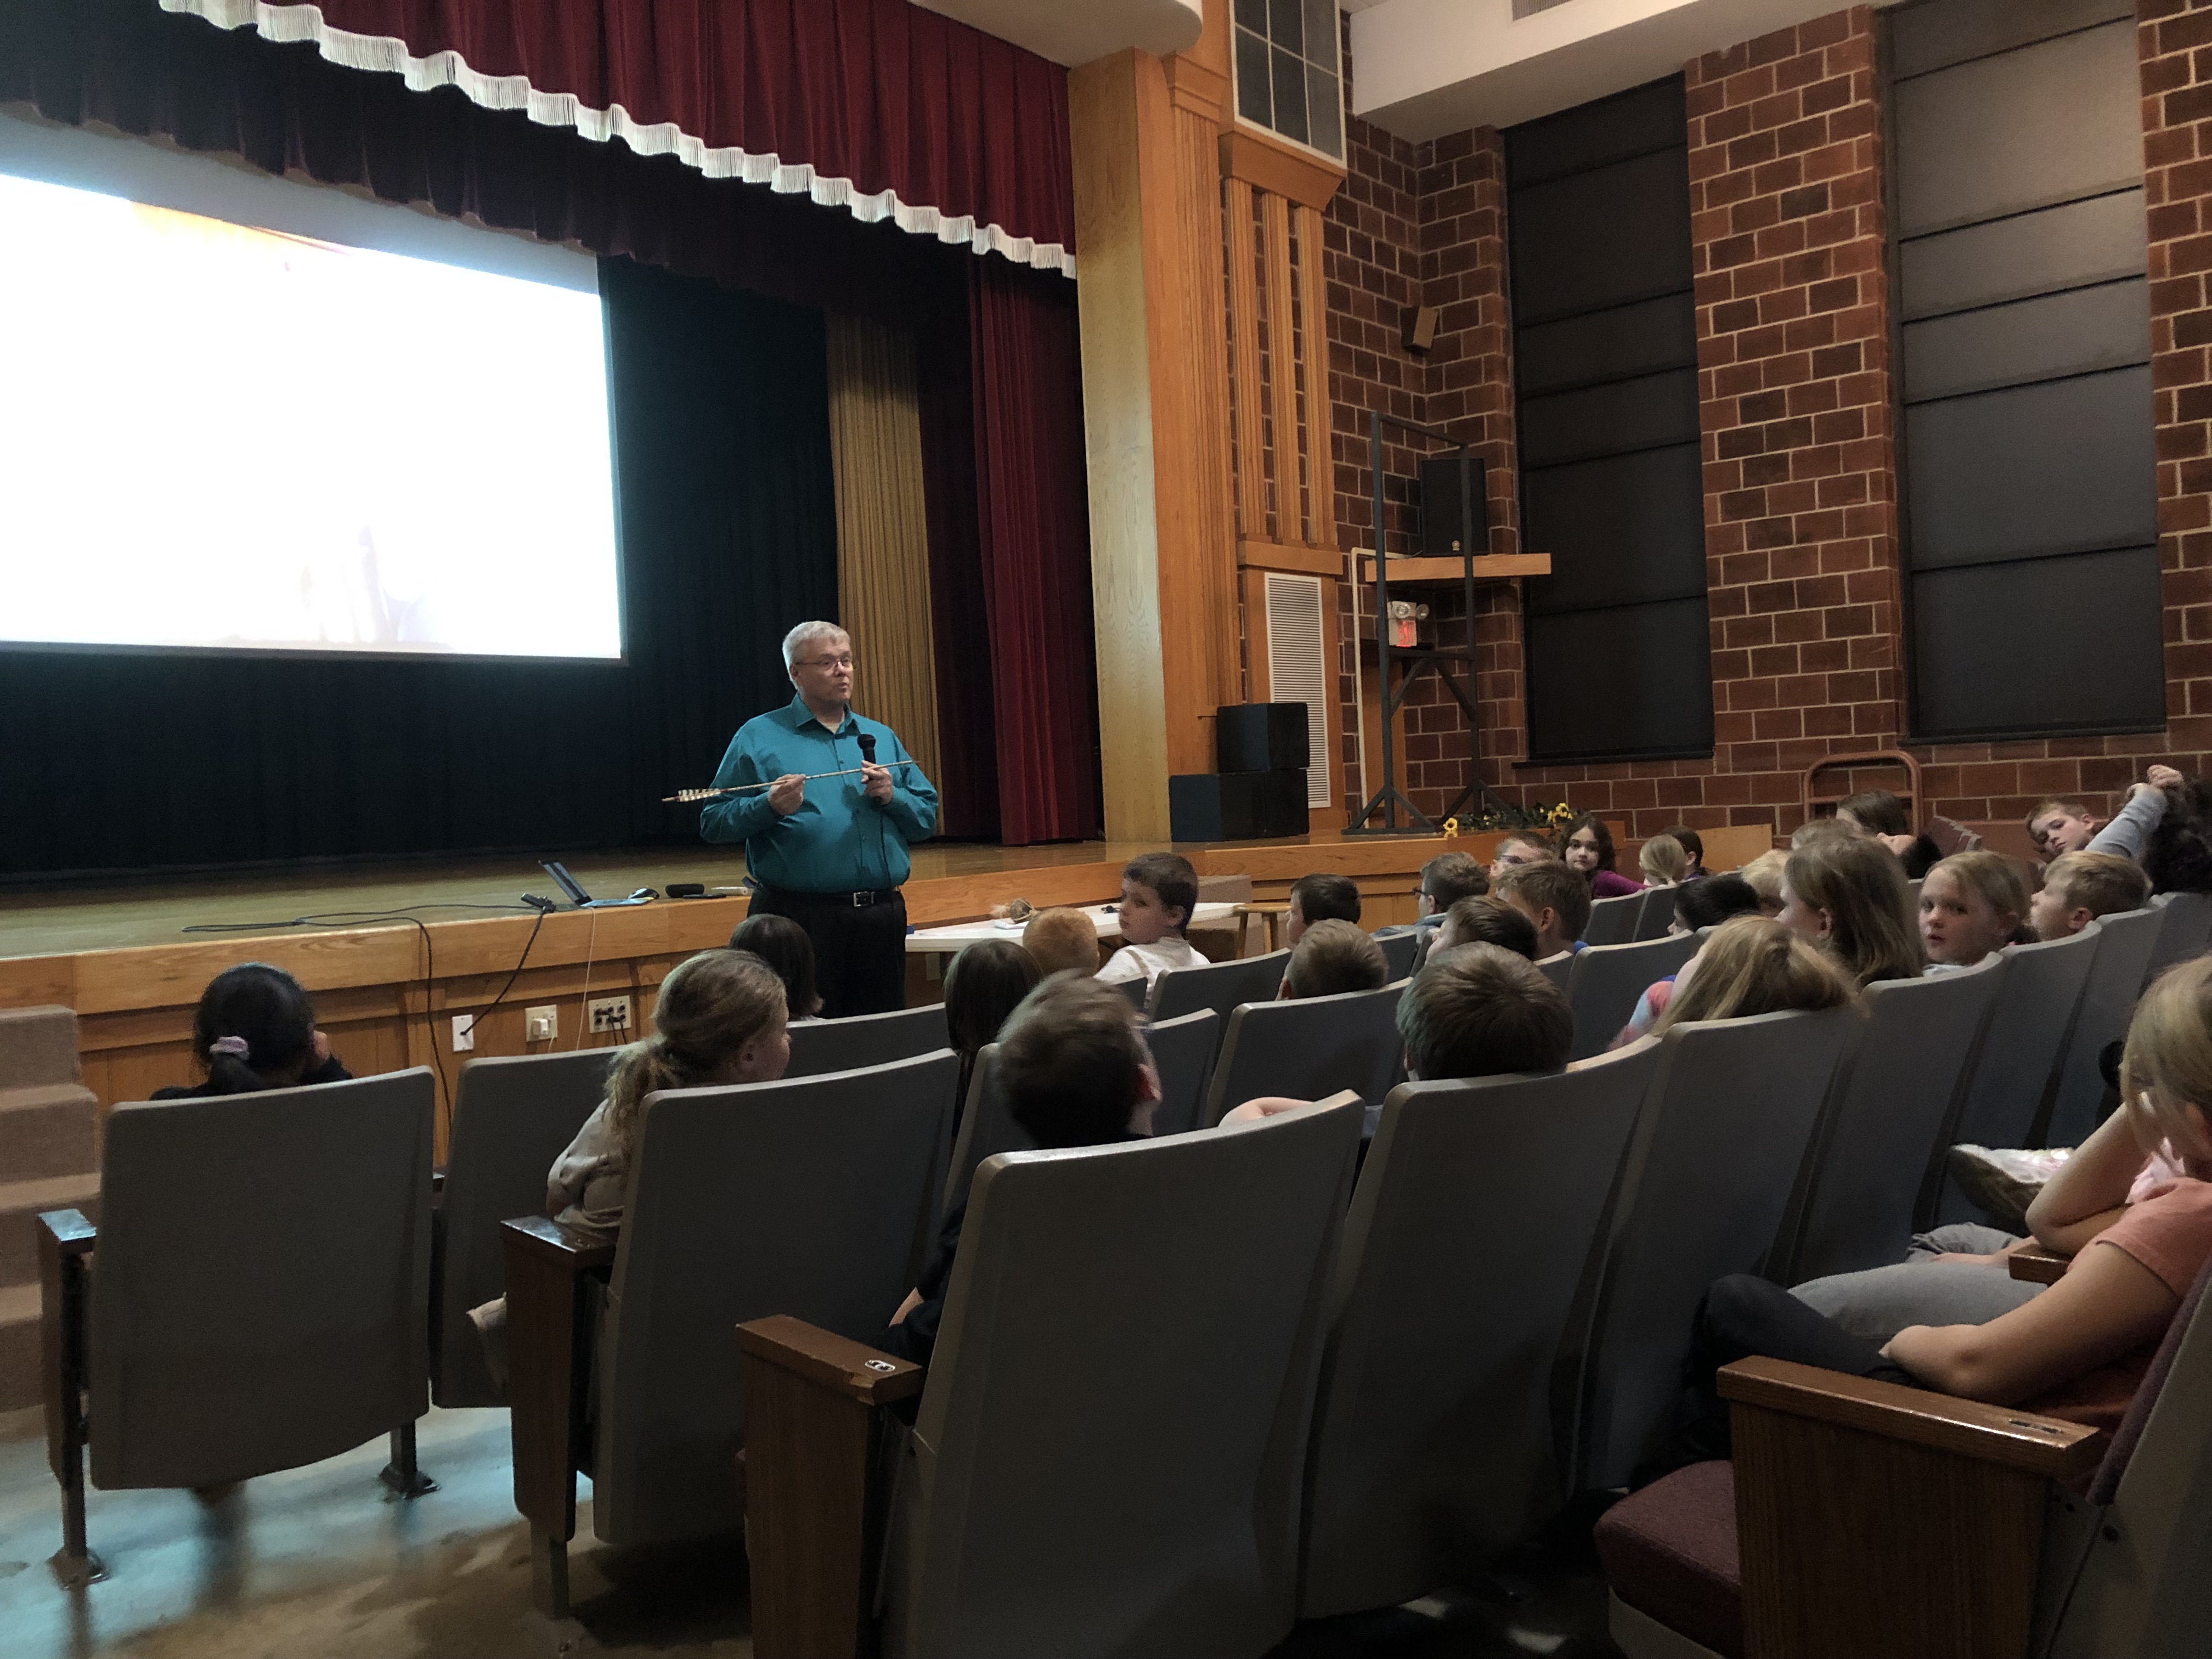 Every year, Mr. Jurrens shares information about the Chickasaw Tribe to the third graders. This year was extra special because Mr. Jurrens had the opportunity to visit the Chickasaw Nation in Oklahoma. He was able to bring back items that the Chickasaw Tribal members created, which included an arrow and a rattle.